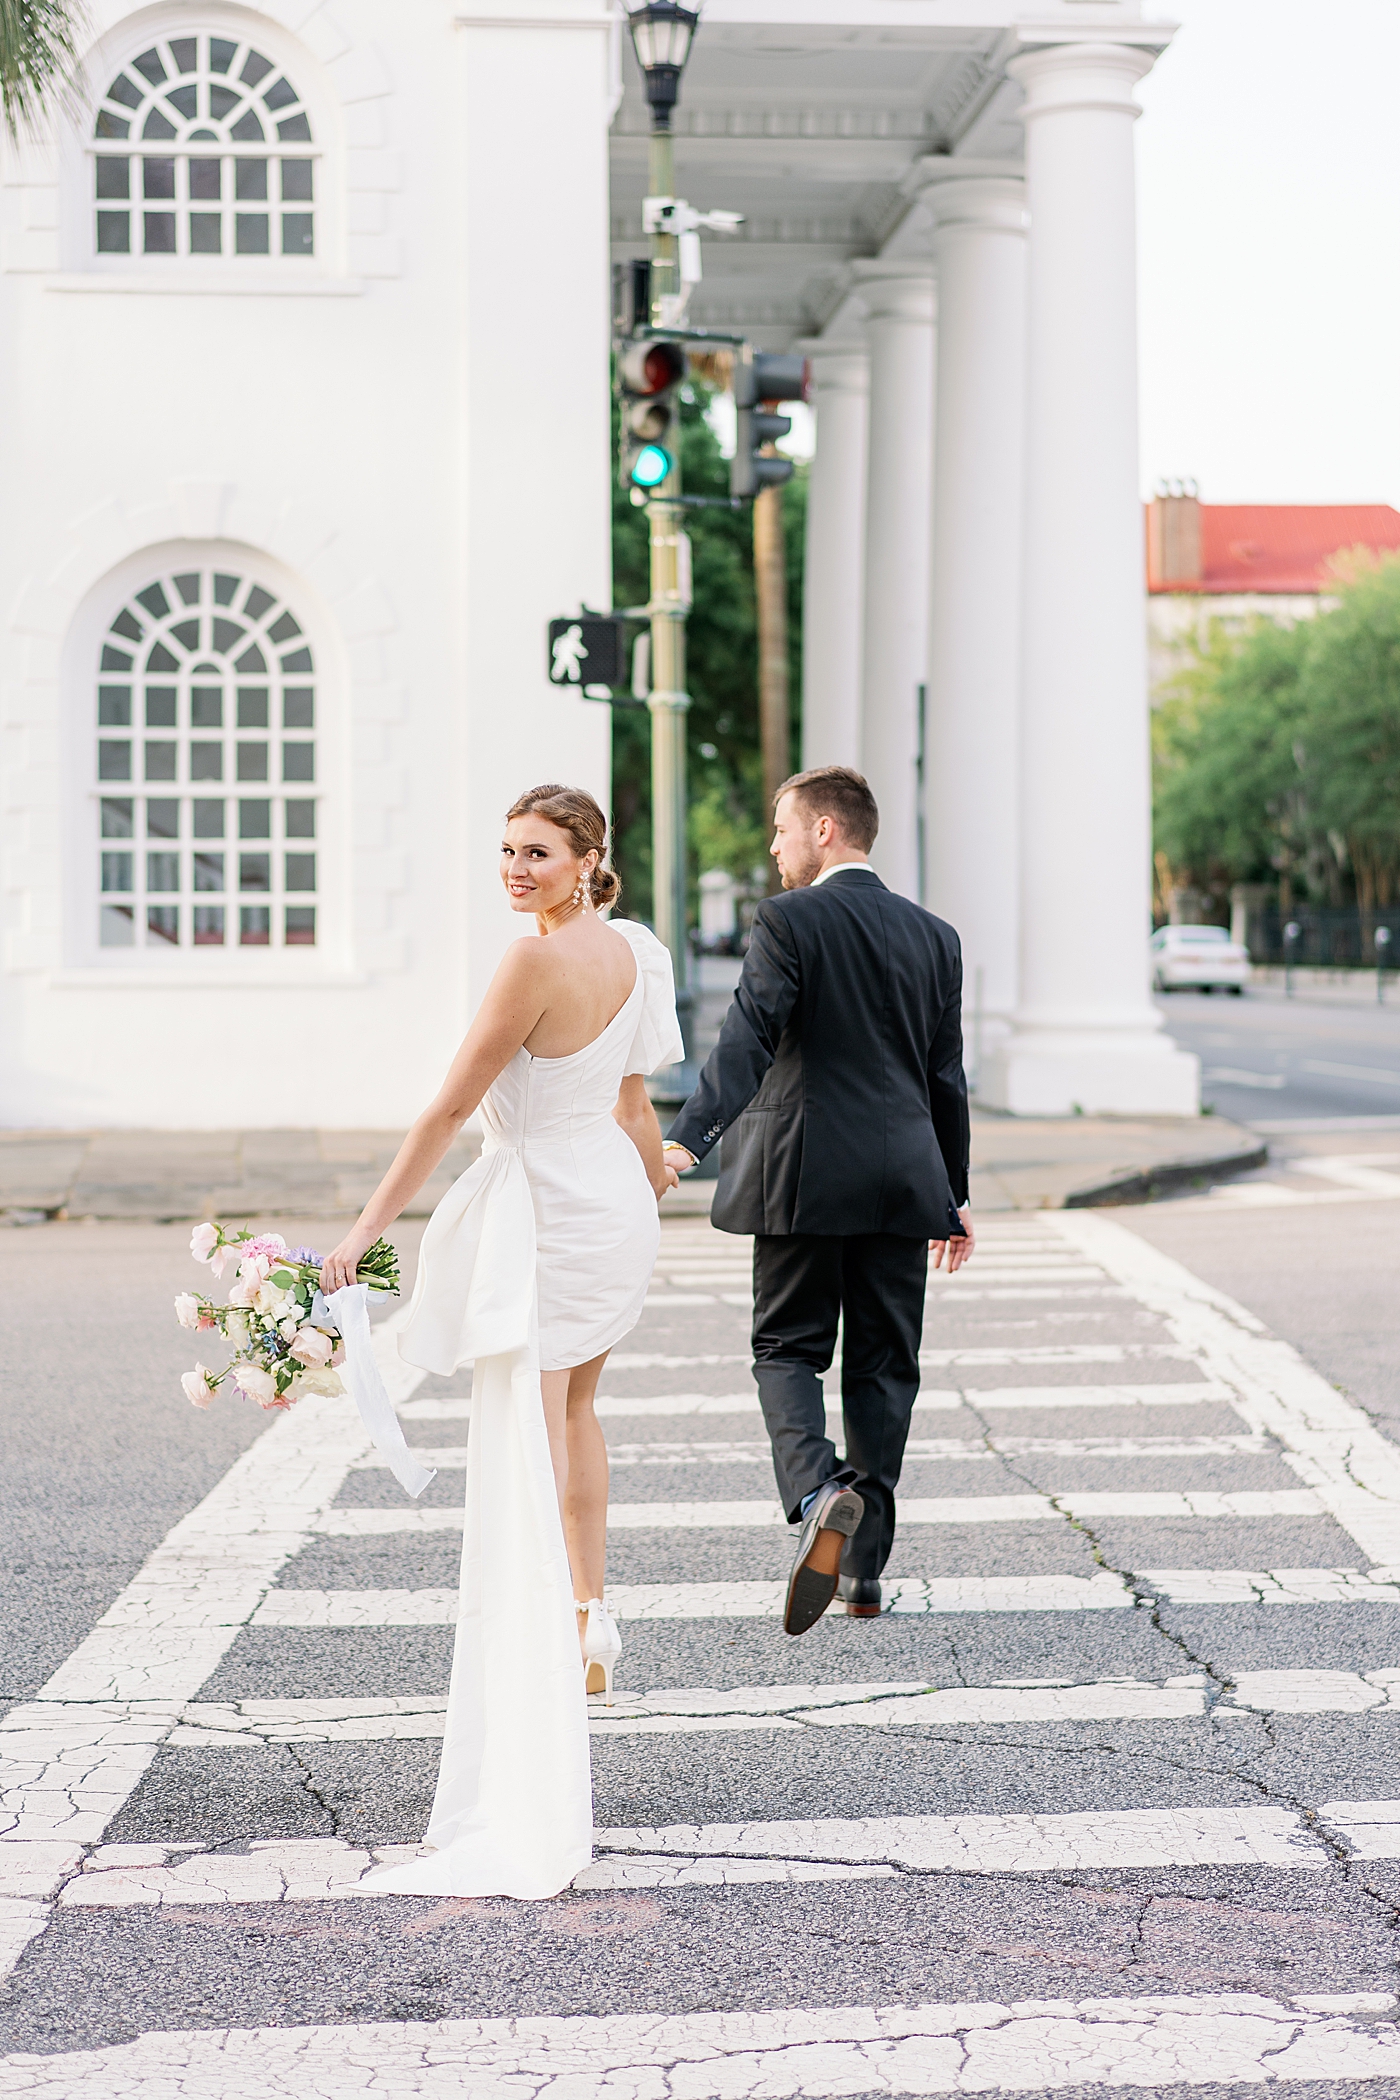 Bride looking over her should while she and groom cross street | Images by Annie Laura Photo